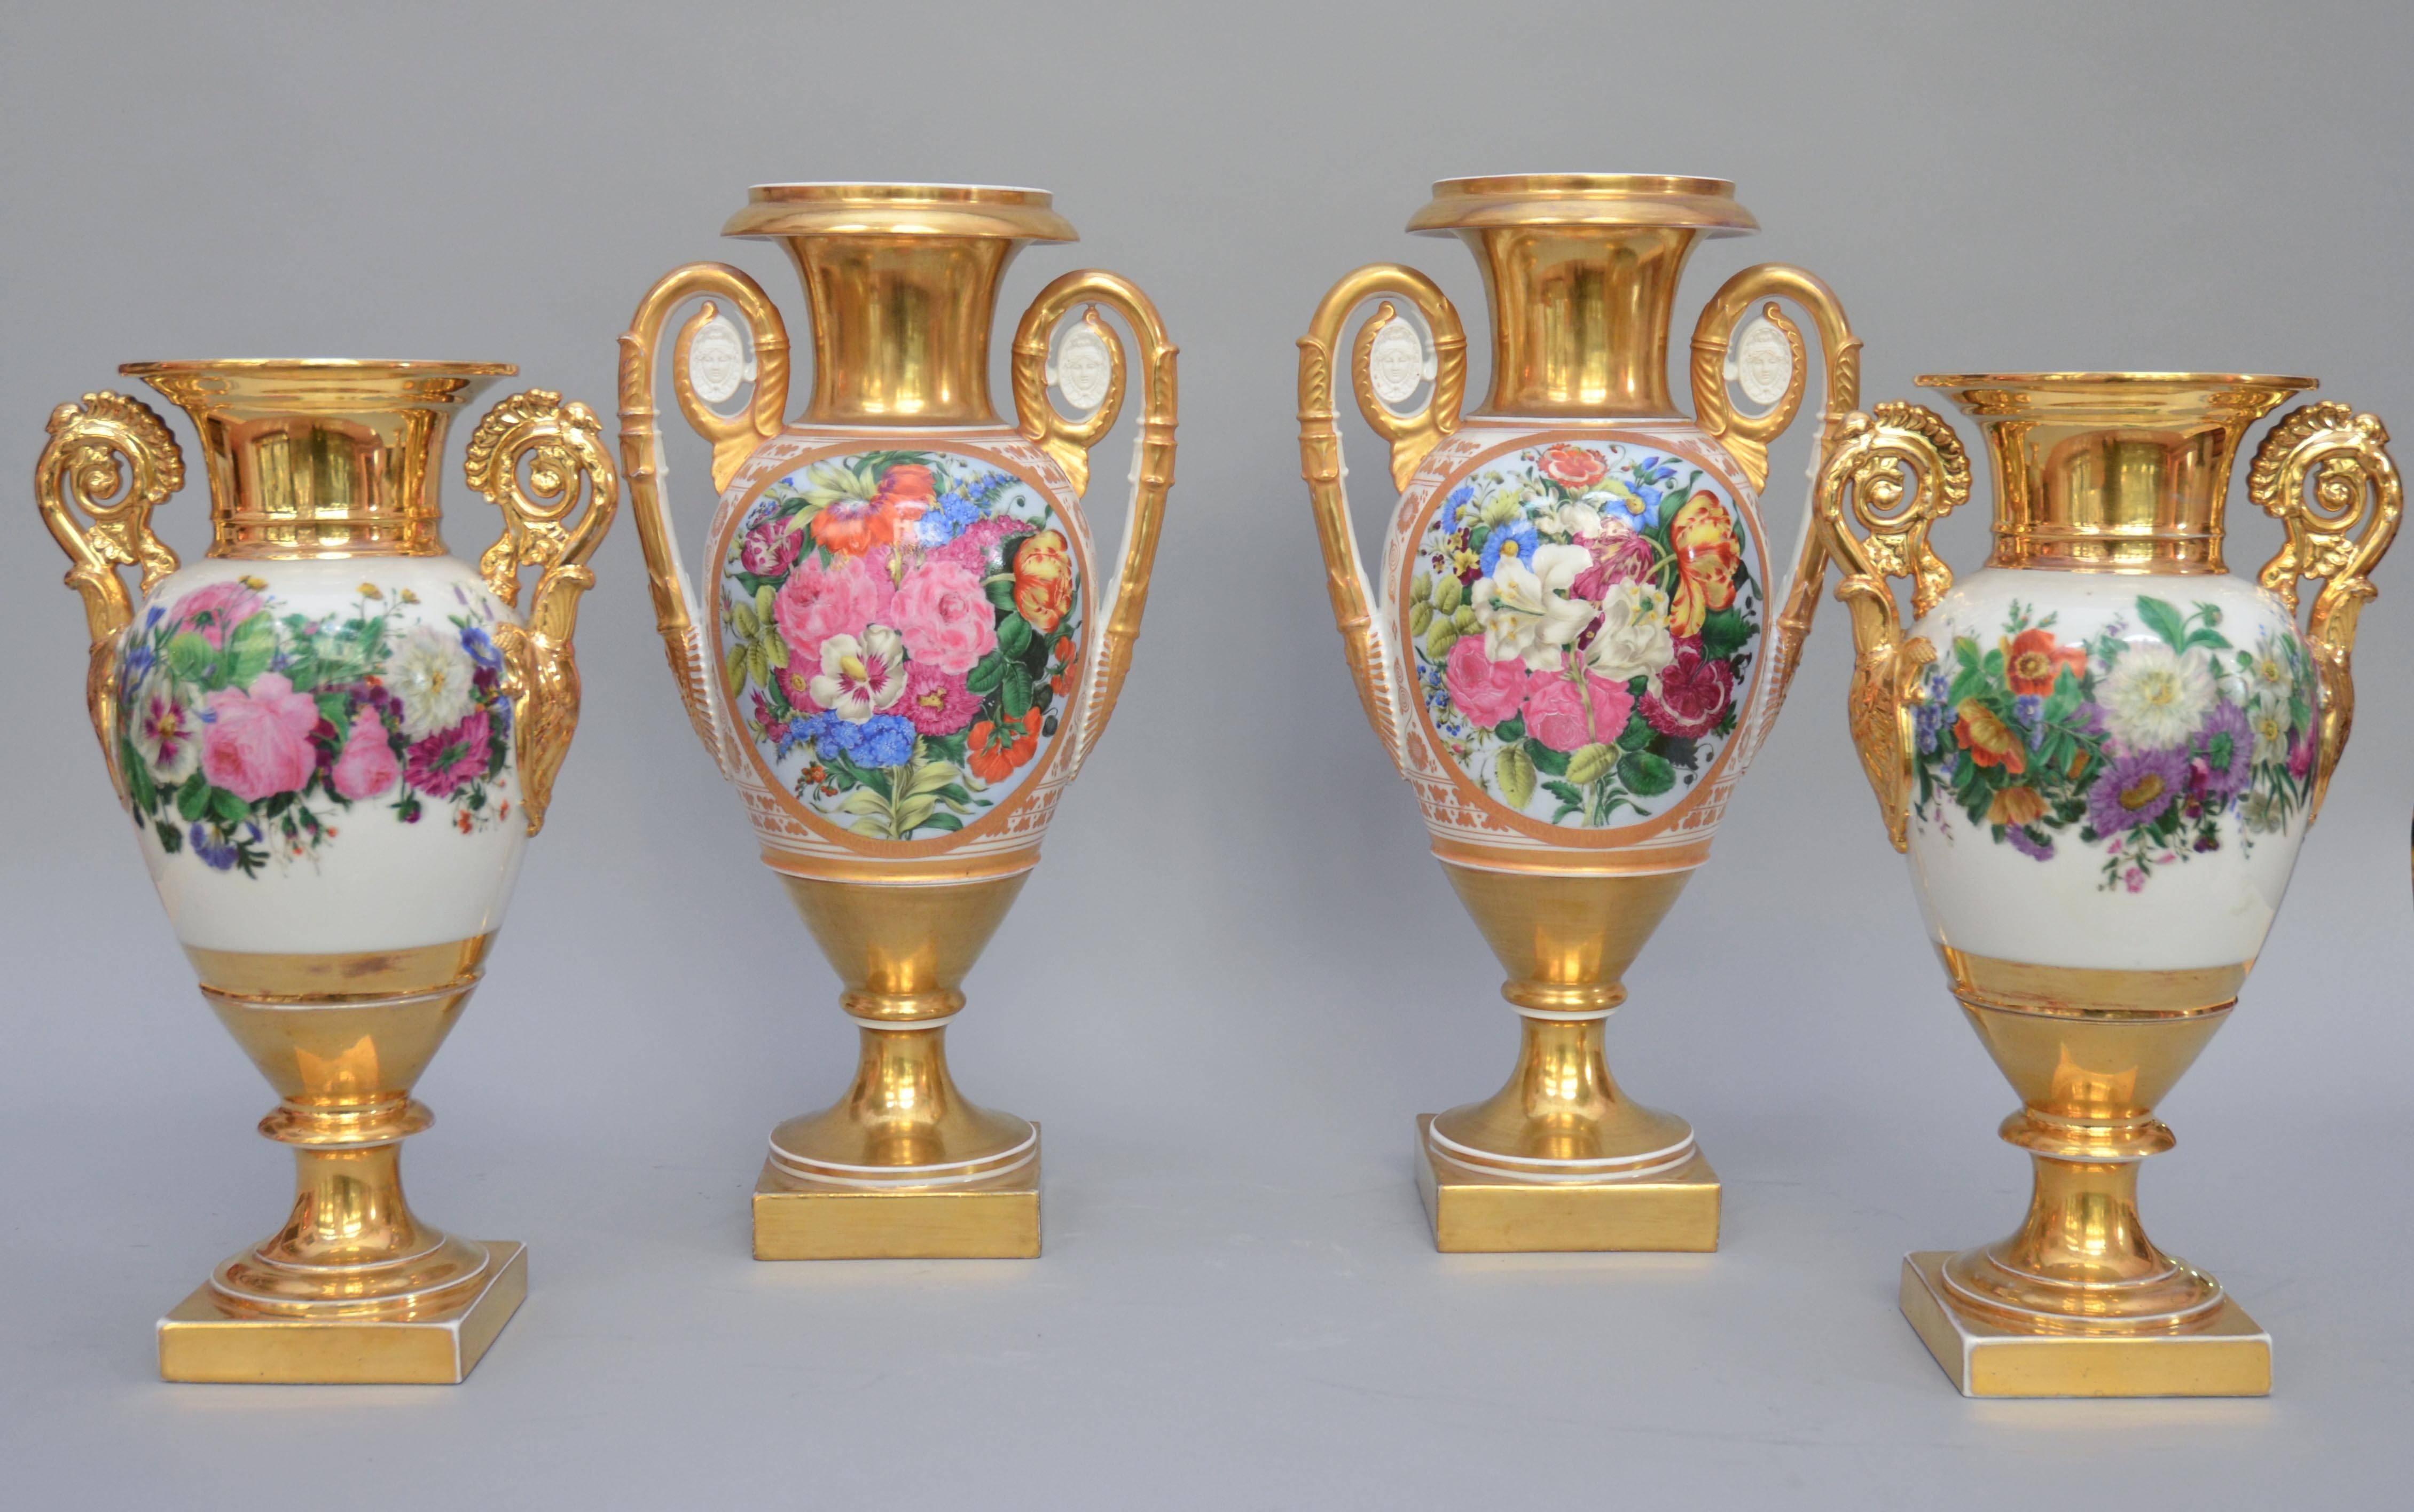 Hand-Painted Mid-19th Century Large Pair of Egg Shaped Vases with Garlands of Flowers, Paris For Sale